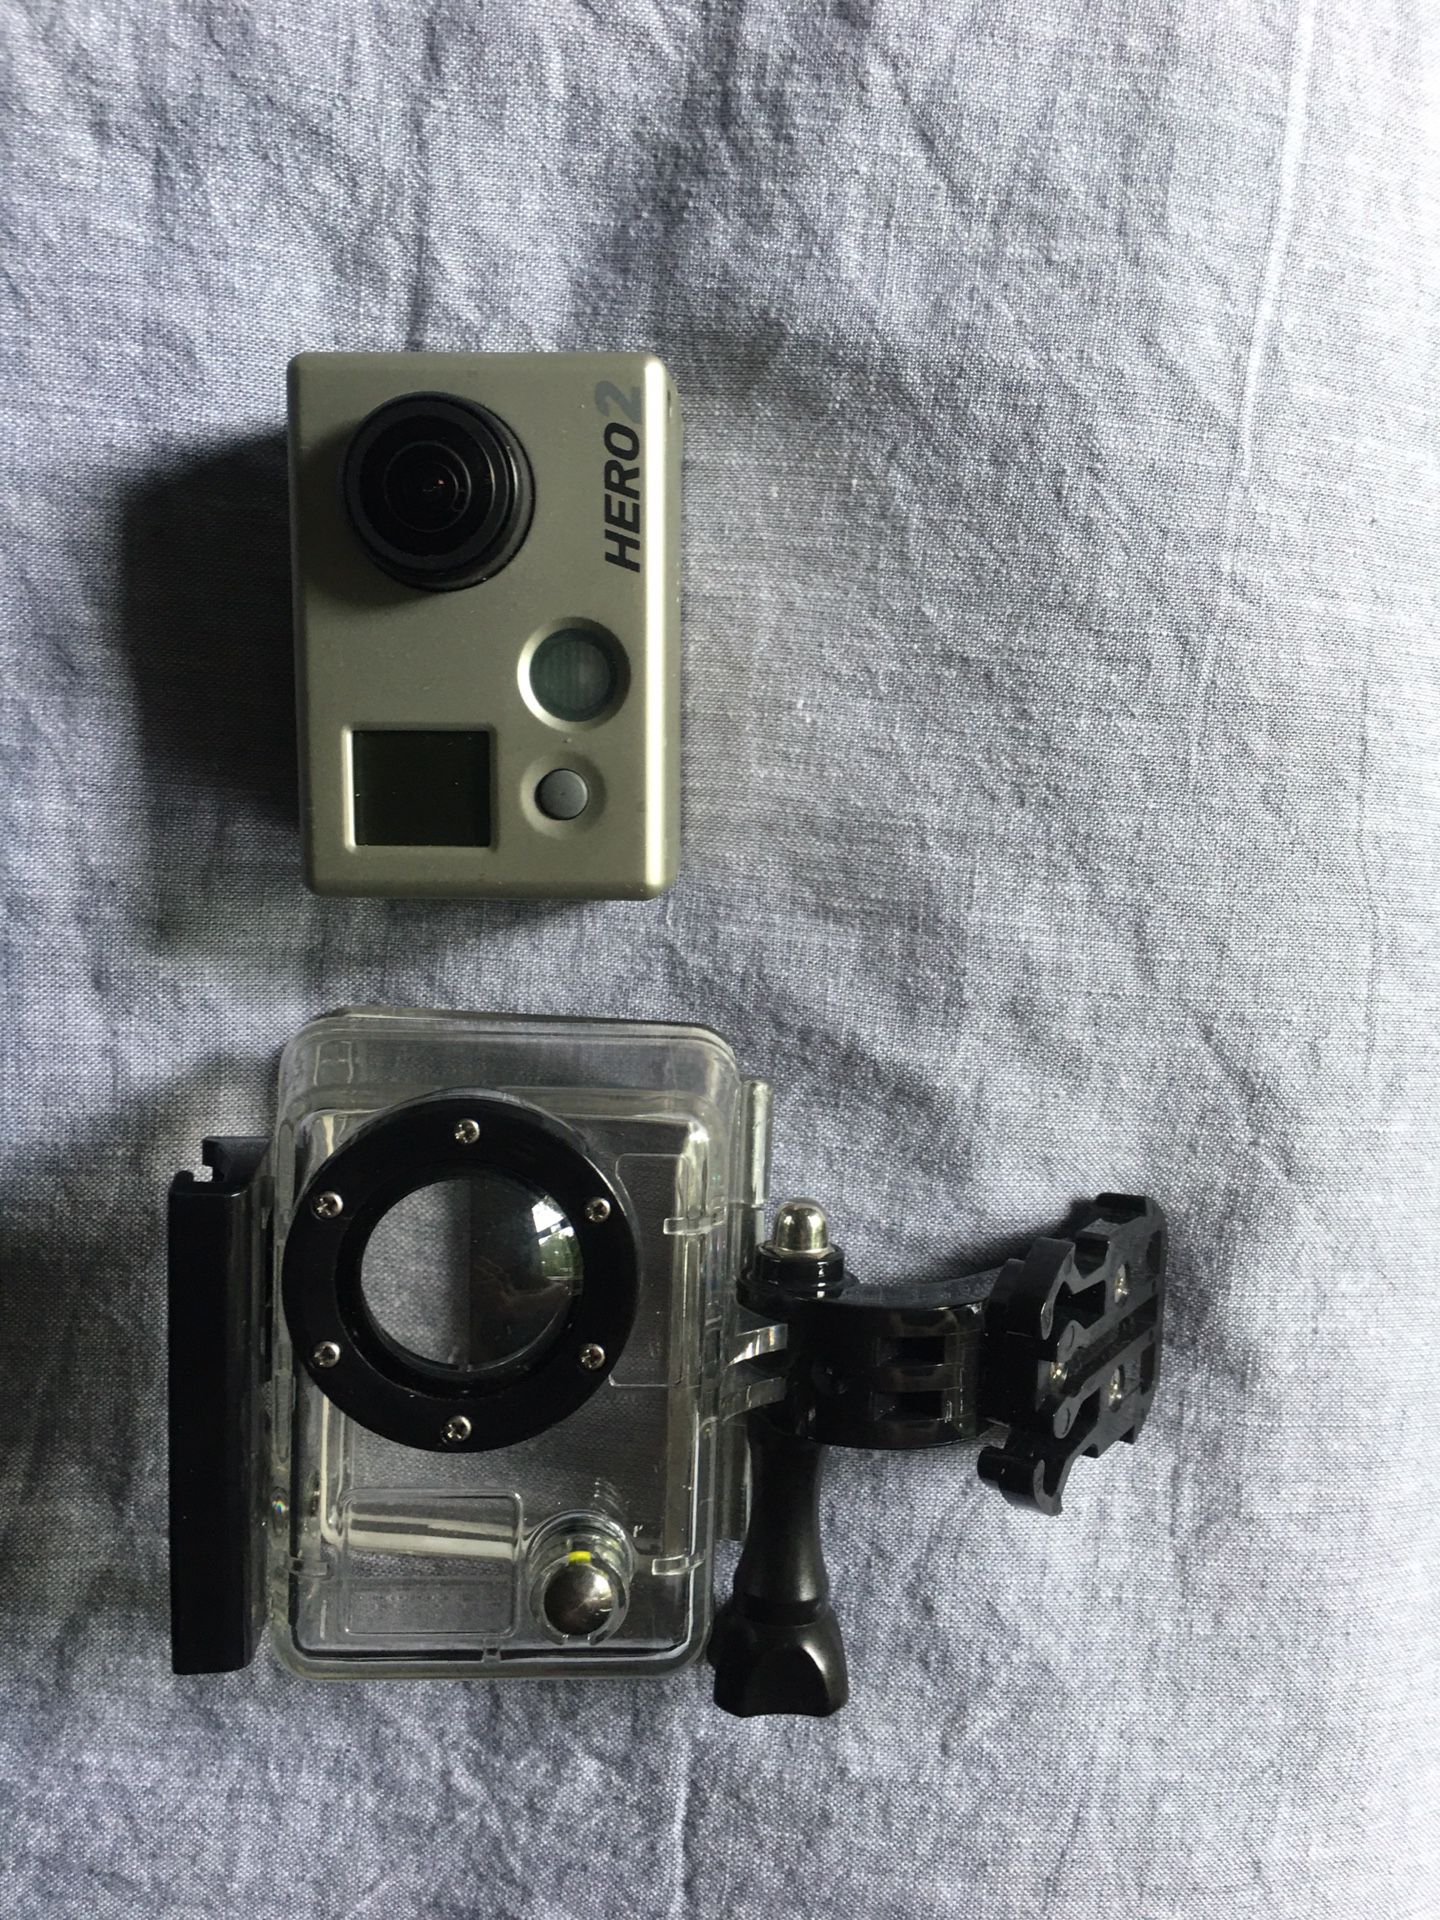 Perfect GoPro Hero 2 with lots of extras